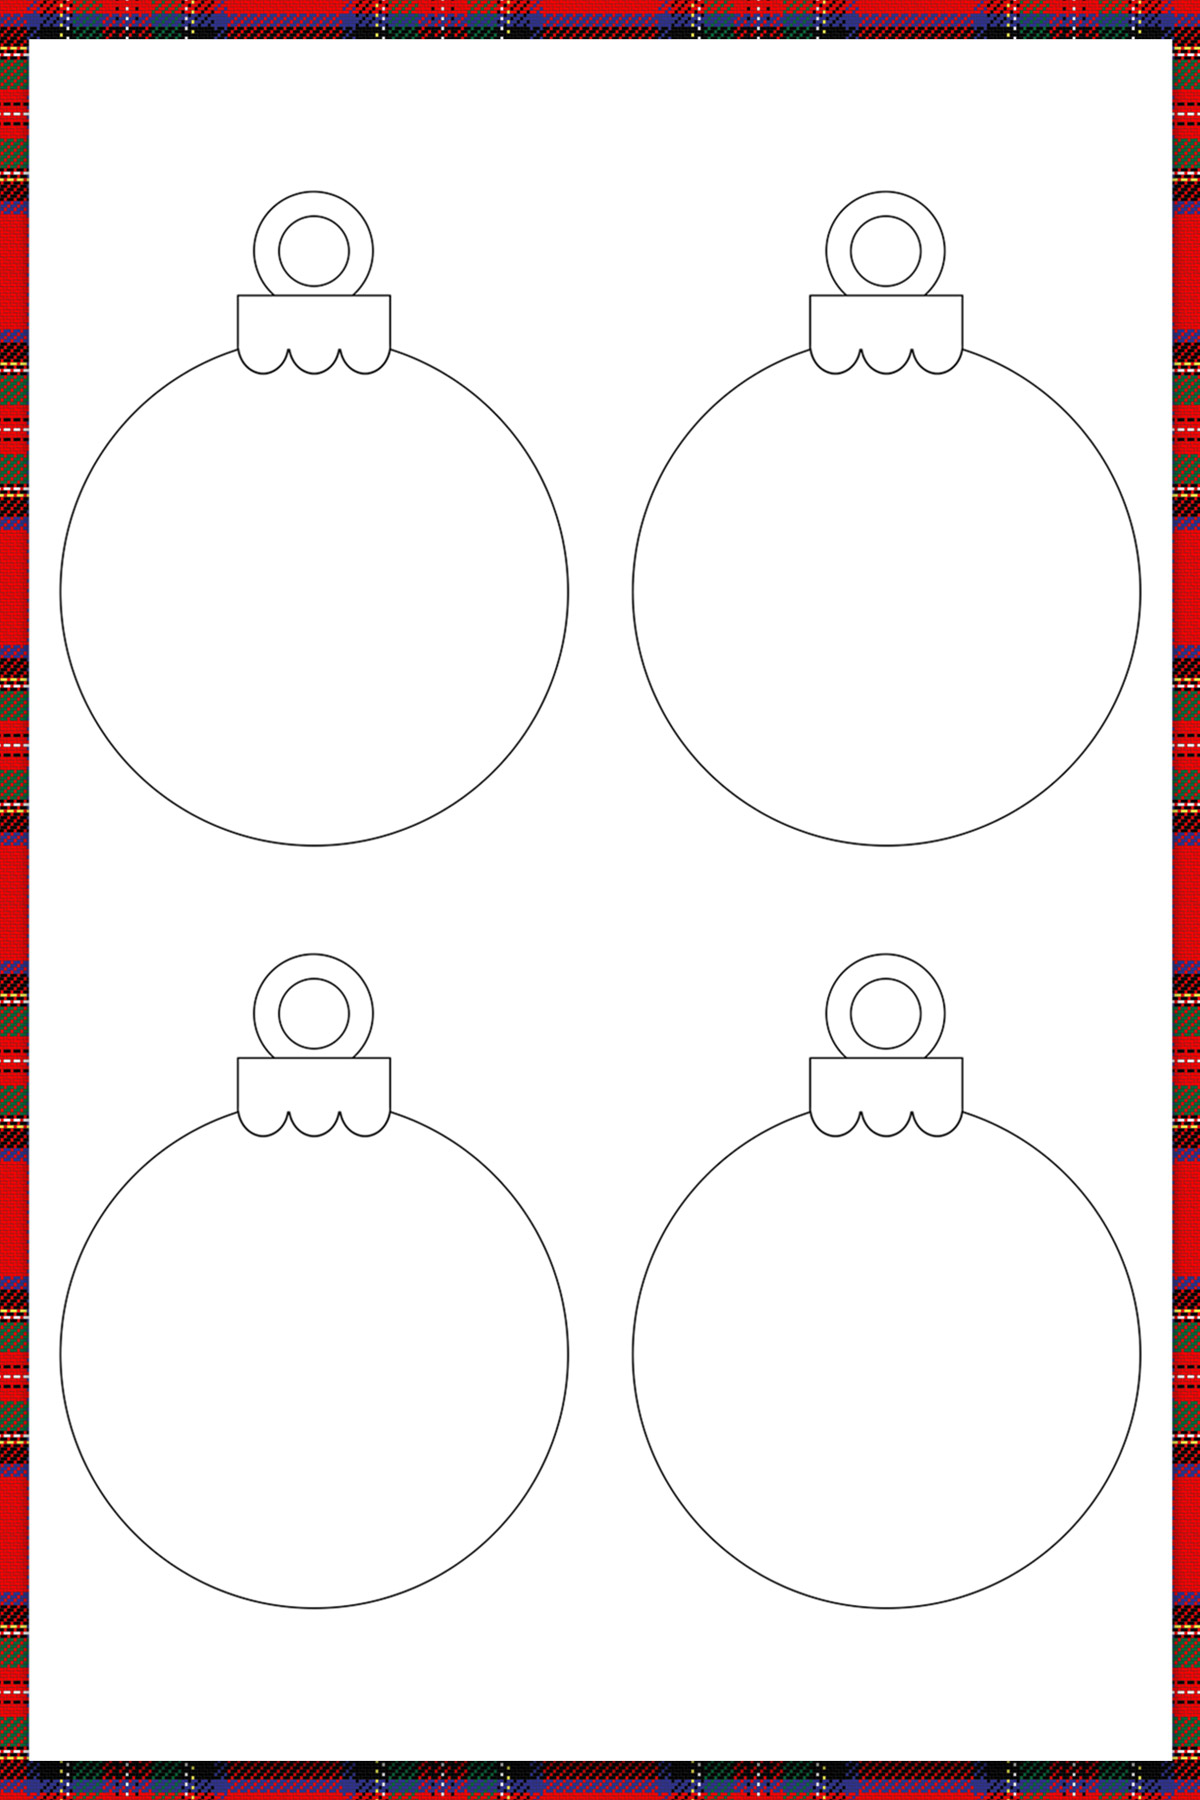 This image is of some of the free Christmas ornaments printable pages you can download at the end of this blog post.